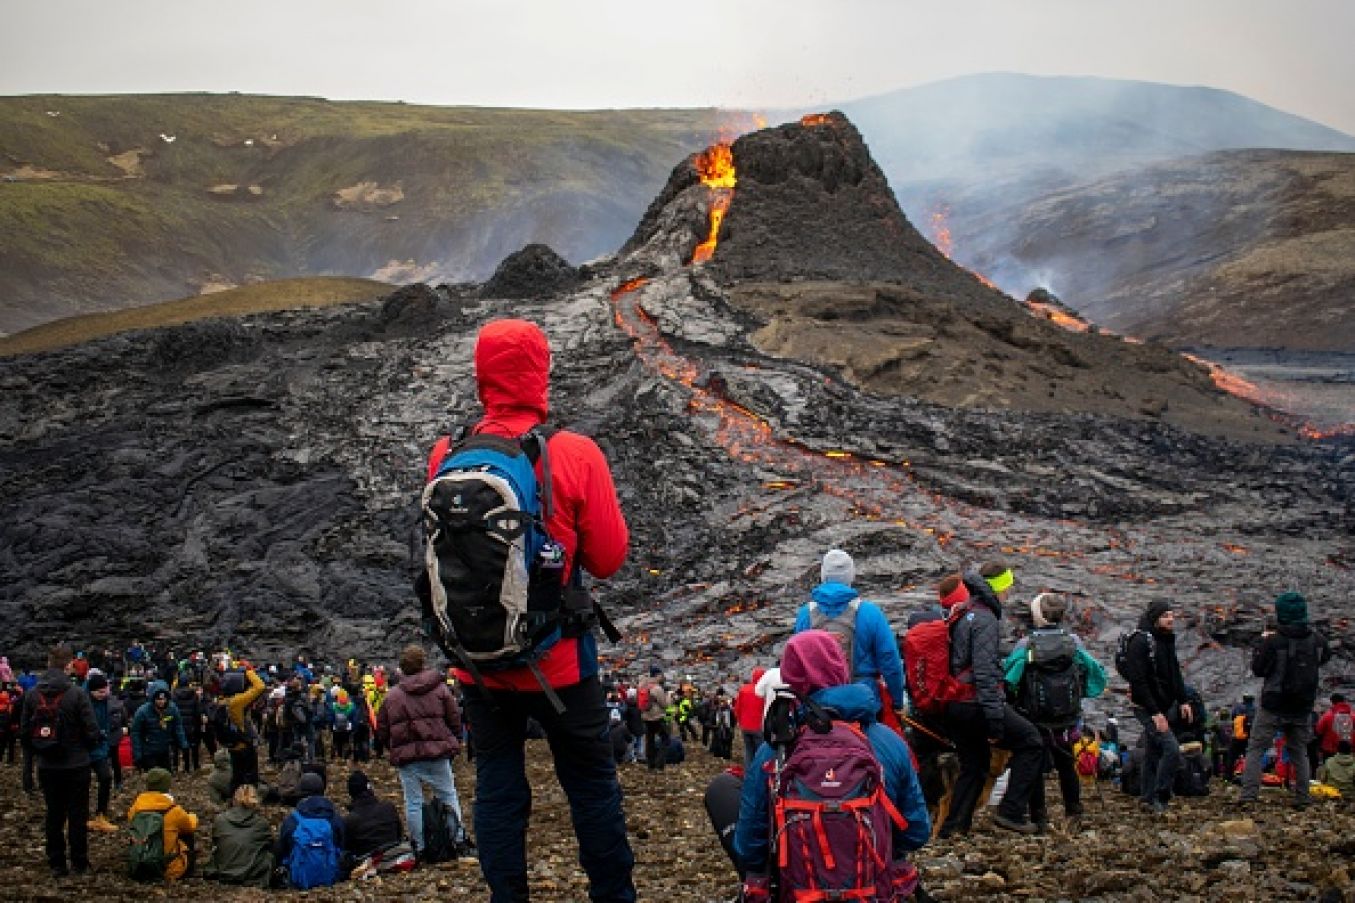 Sunday Hikers Look At The Lava Flowing From The Volcano. (Photo By Jeremie Richard / Afp) (Photo By Jeremie Richard/Afp Via Getty Images)